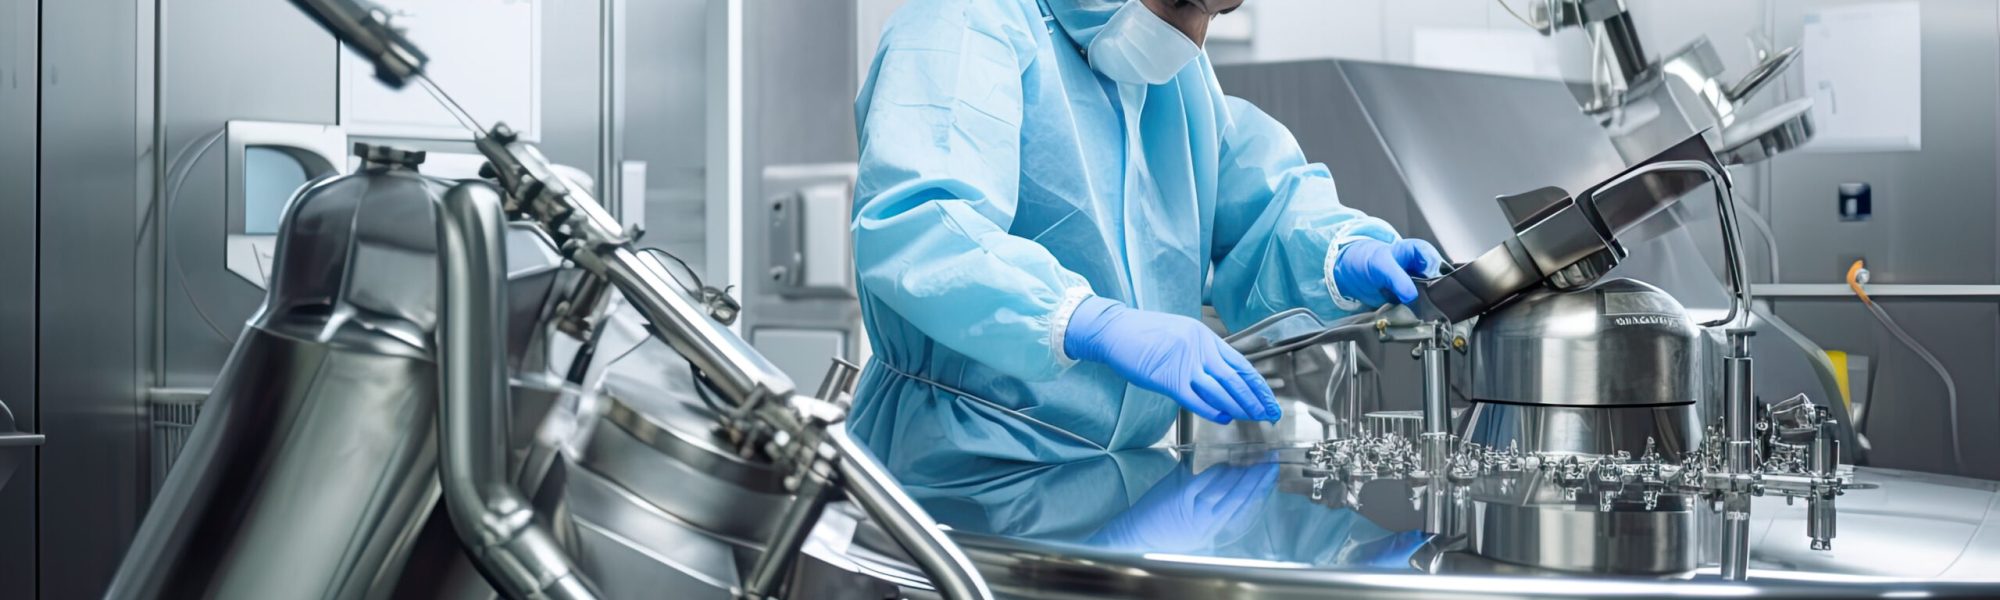 A man in protective clothing working on equipment. Pharmaceautical clean room, industrial design, large scale chemical production in controlled sterile conditions, AI generative